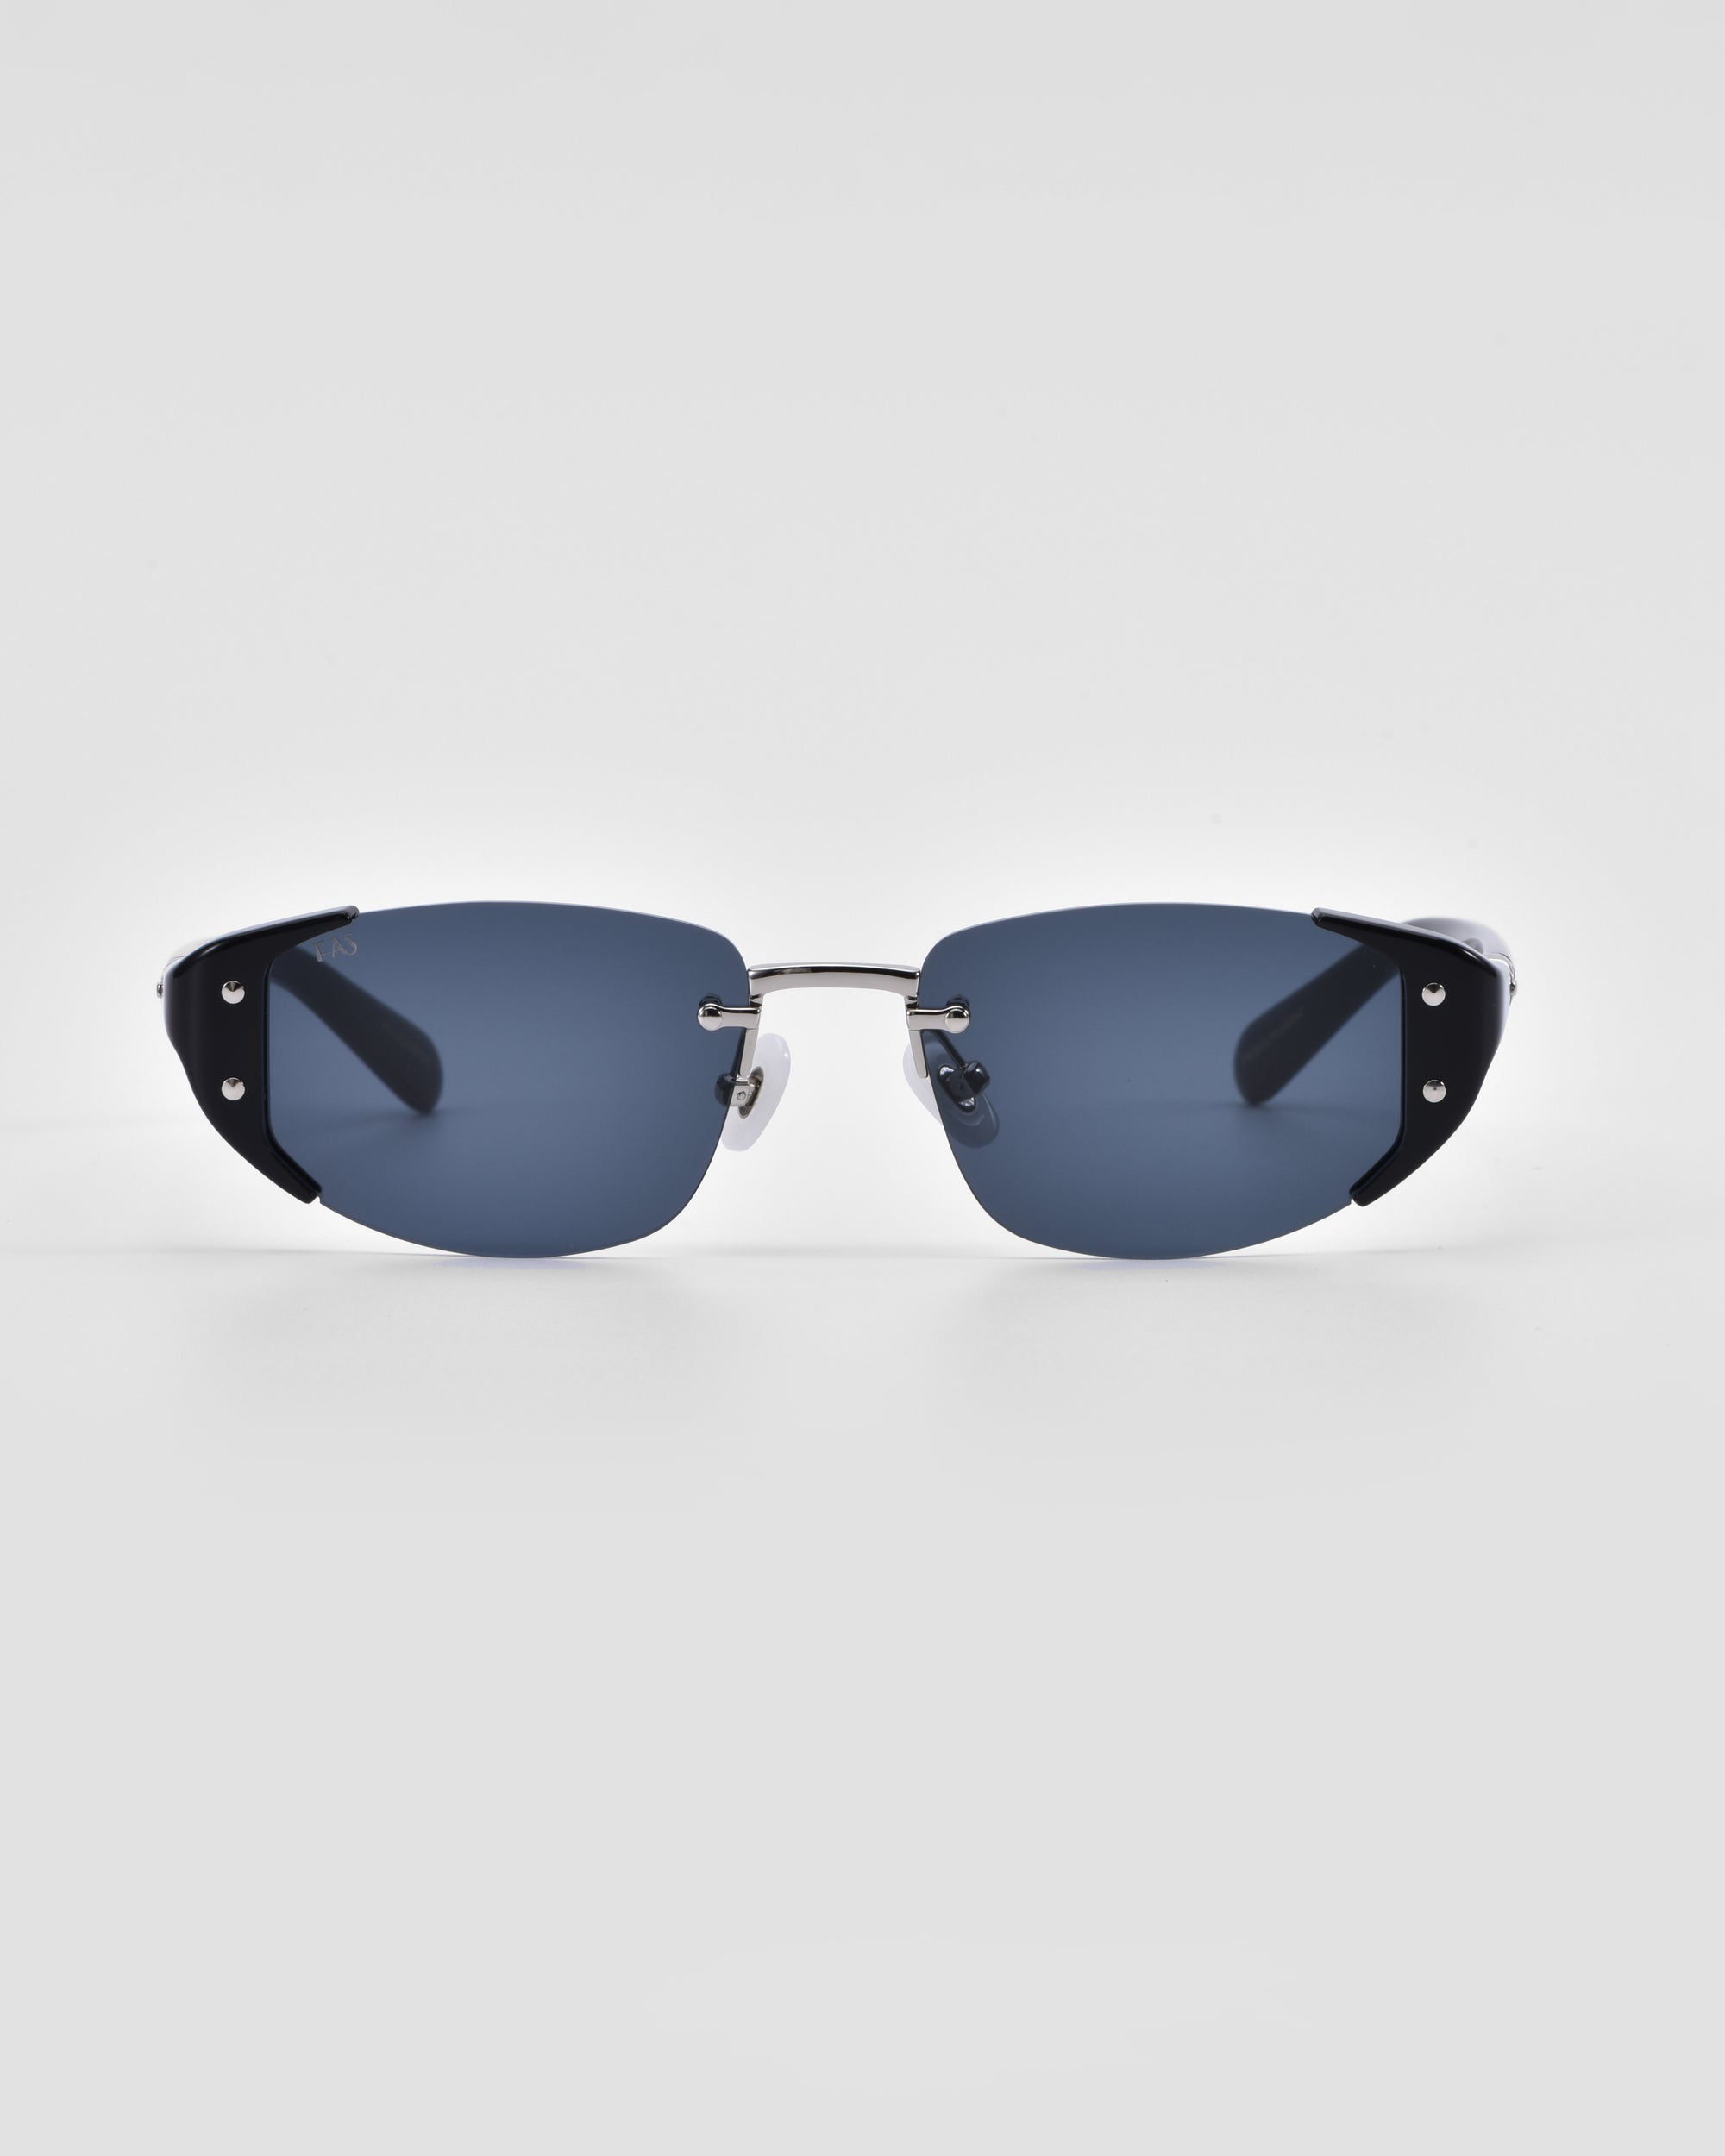 A pair of modern, rimless Harbour sunglasses by For Art's Sake® with dark blue tinted lenses and thin metallic arms featuring black accents near the hinges. The 18 karat gold plating adds a touch of luxury, while the plain white background emphasizes the sleek design and minimalist style of this retro-inspired eyewear.